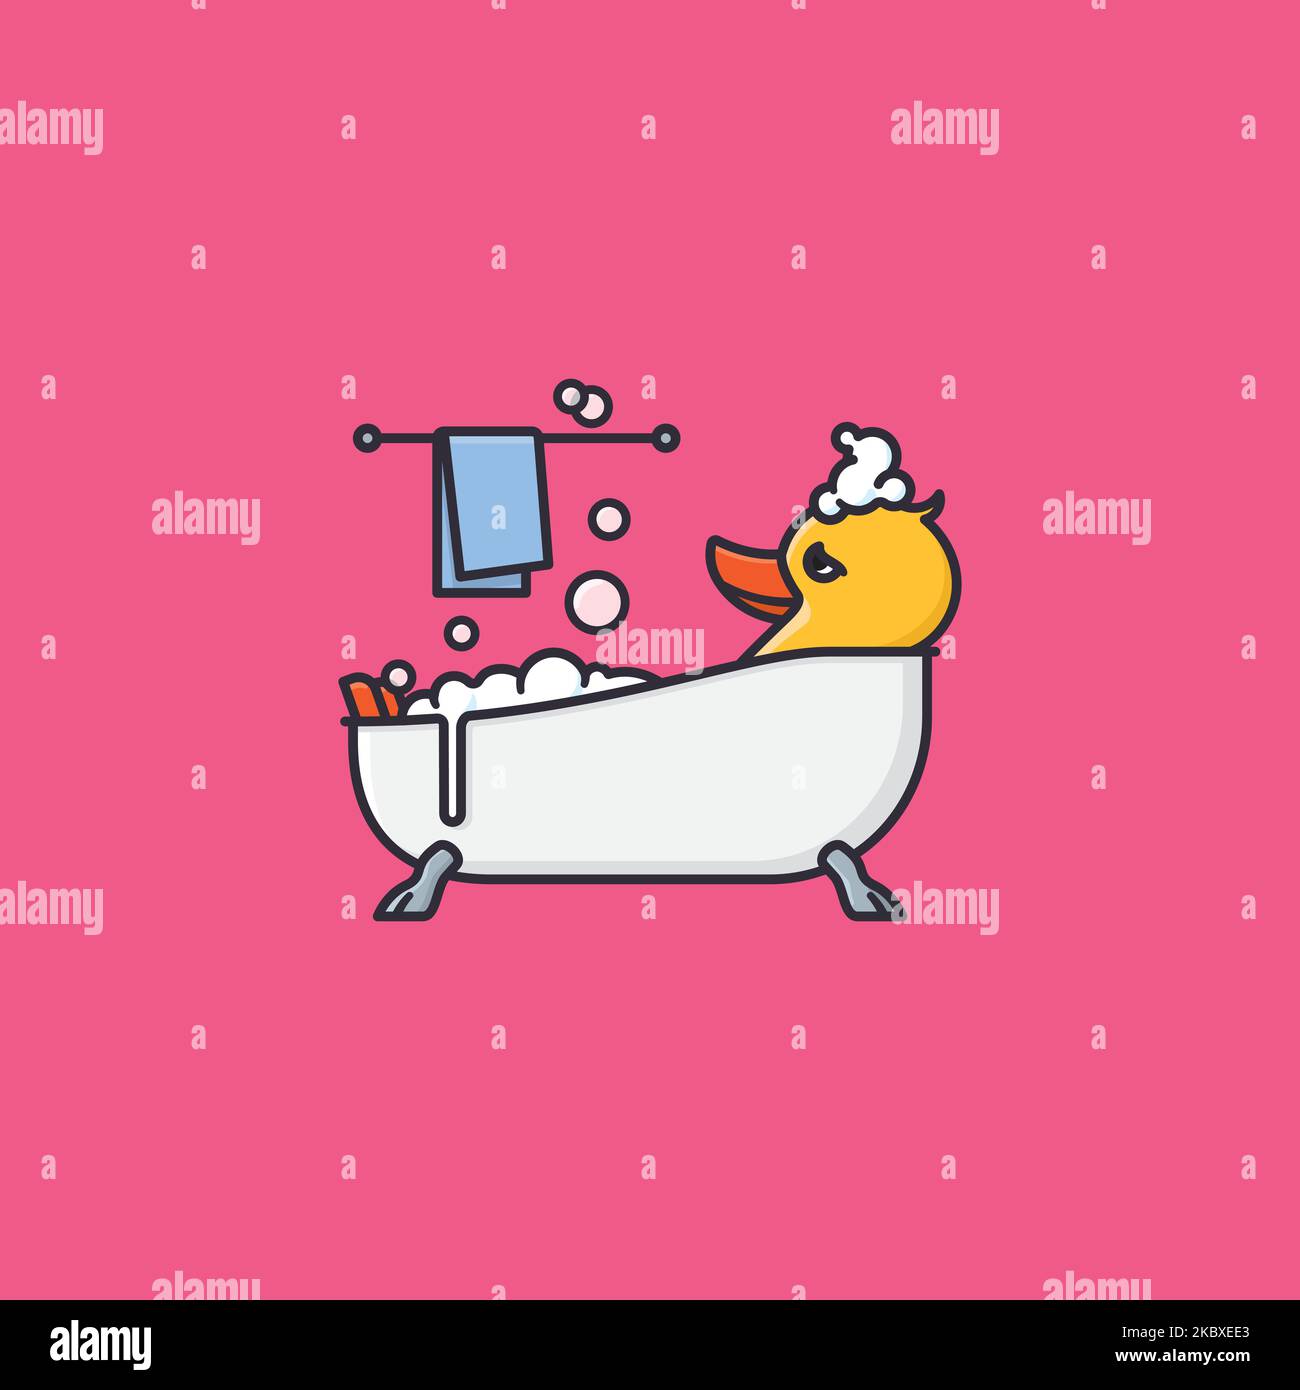 Baby in bubble bath Stock Vector Images - Alamy